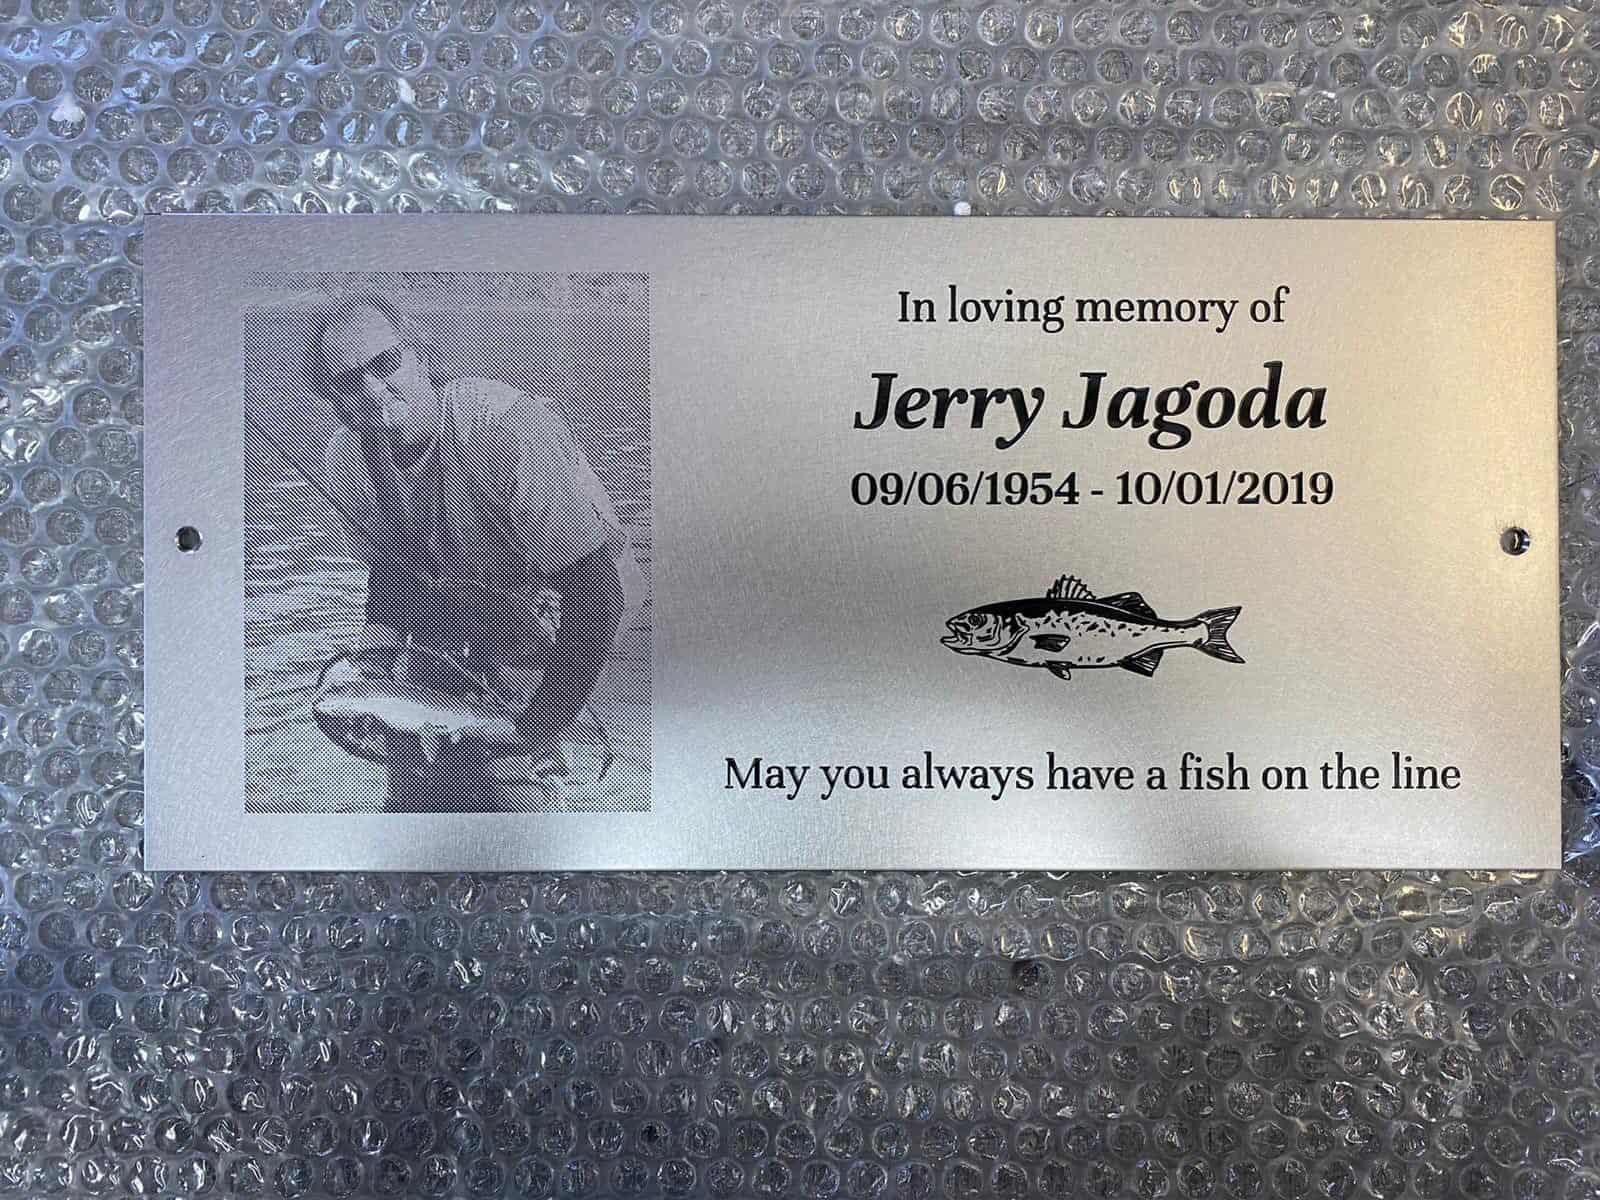 aluminium brushed silver finish, memorial bench plaque with photo metal 